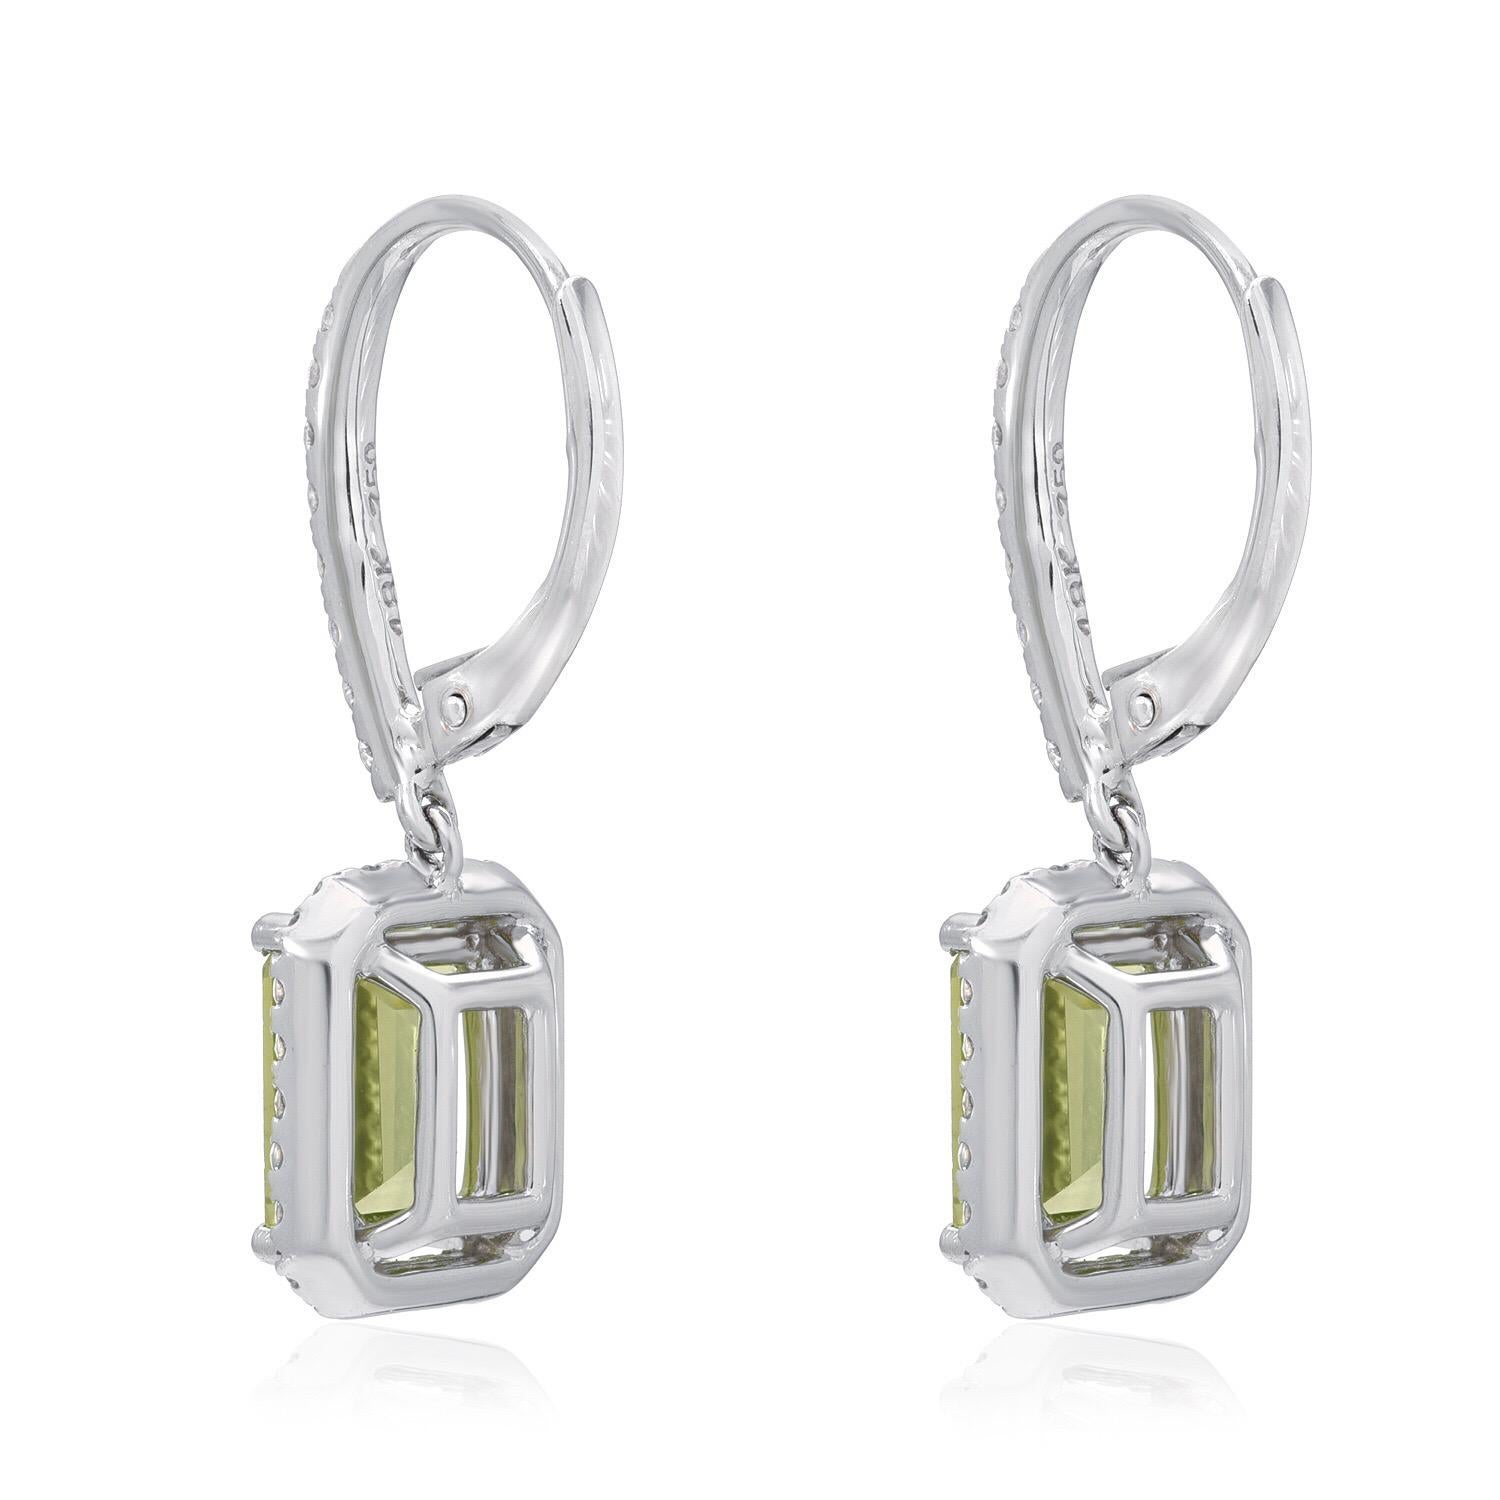 Peridot emerald cut pair, weighing a total of 3.20 carats, are adorned by a total of 0.52 carat round brilliant diamonds, in these drop lever back 18K white gold earrings for women.
Approximately 1 inch in length.
Returns are accepted and paid by us